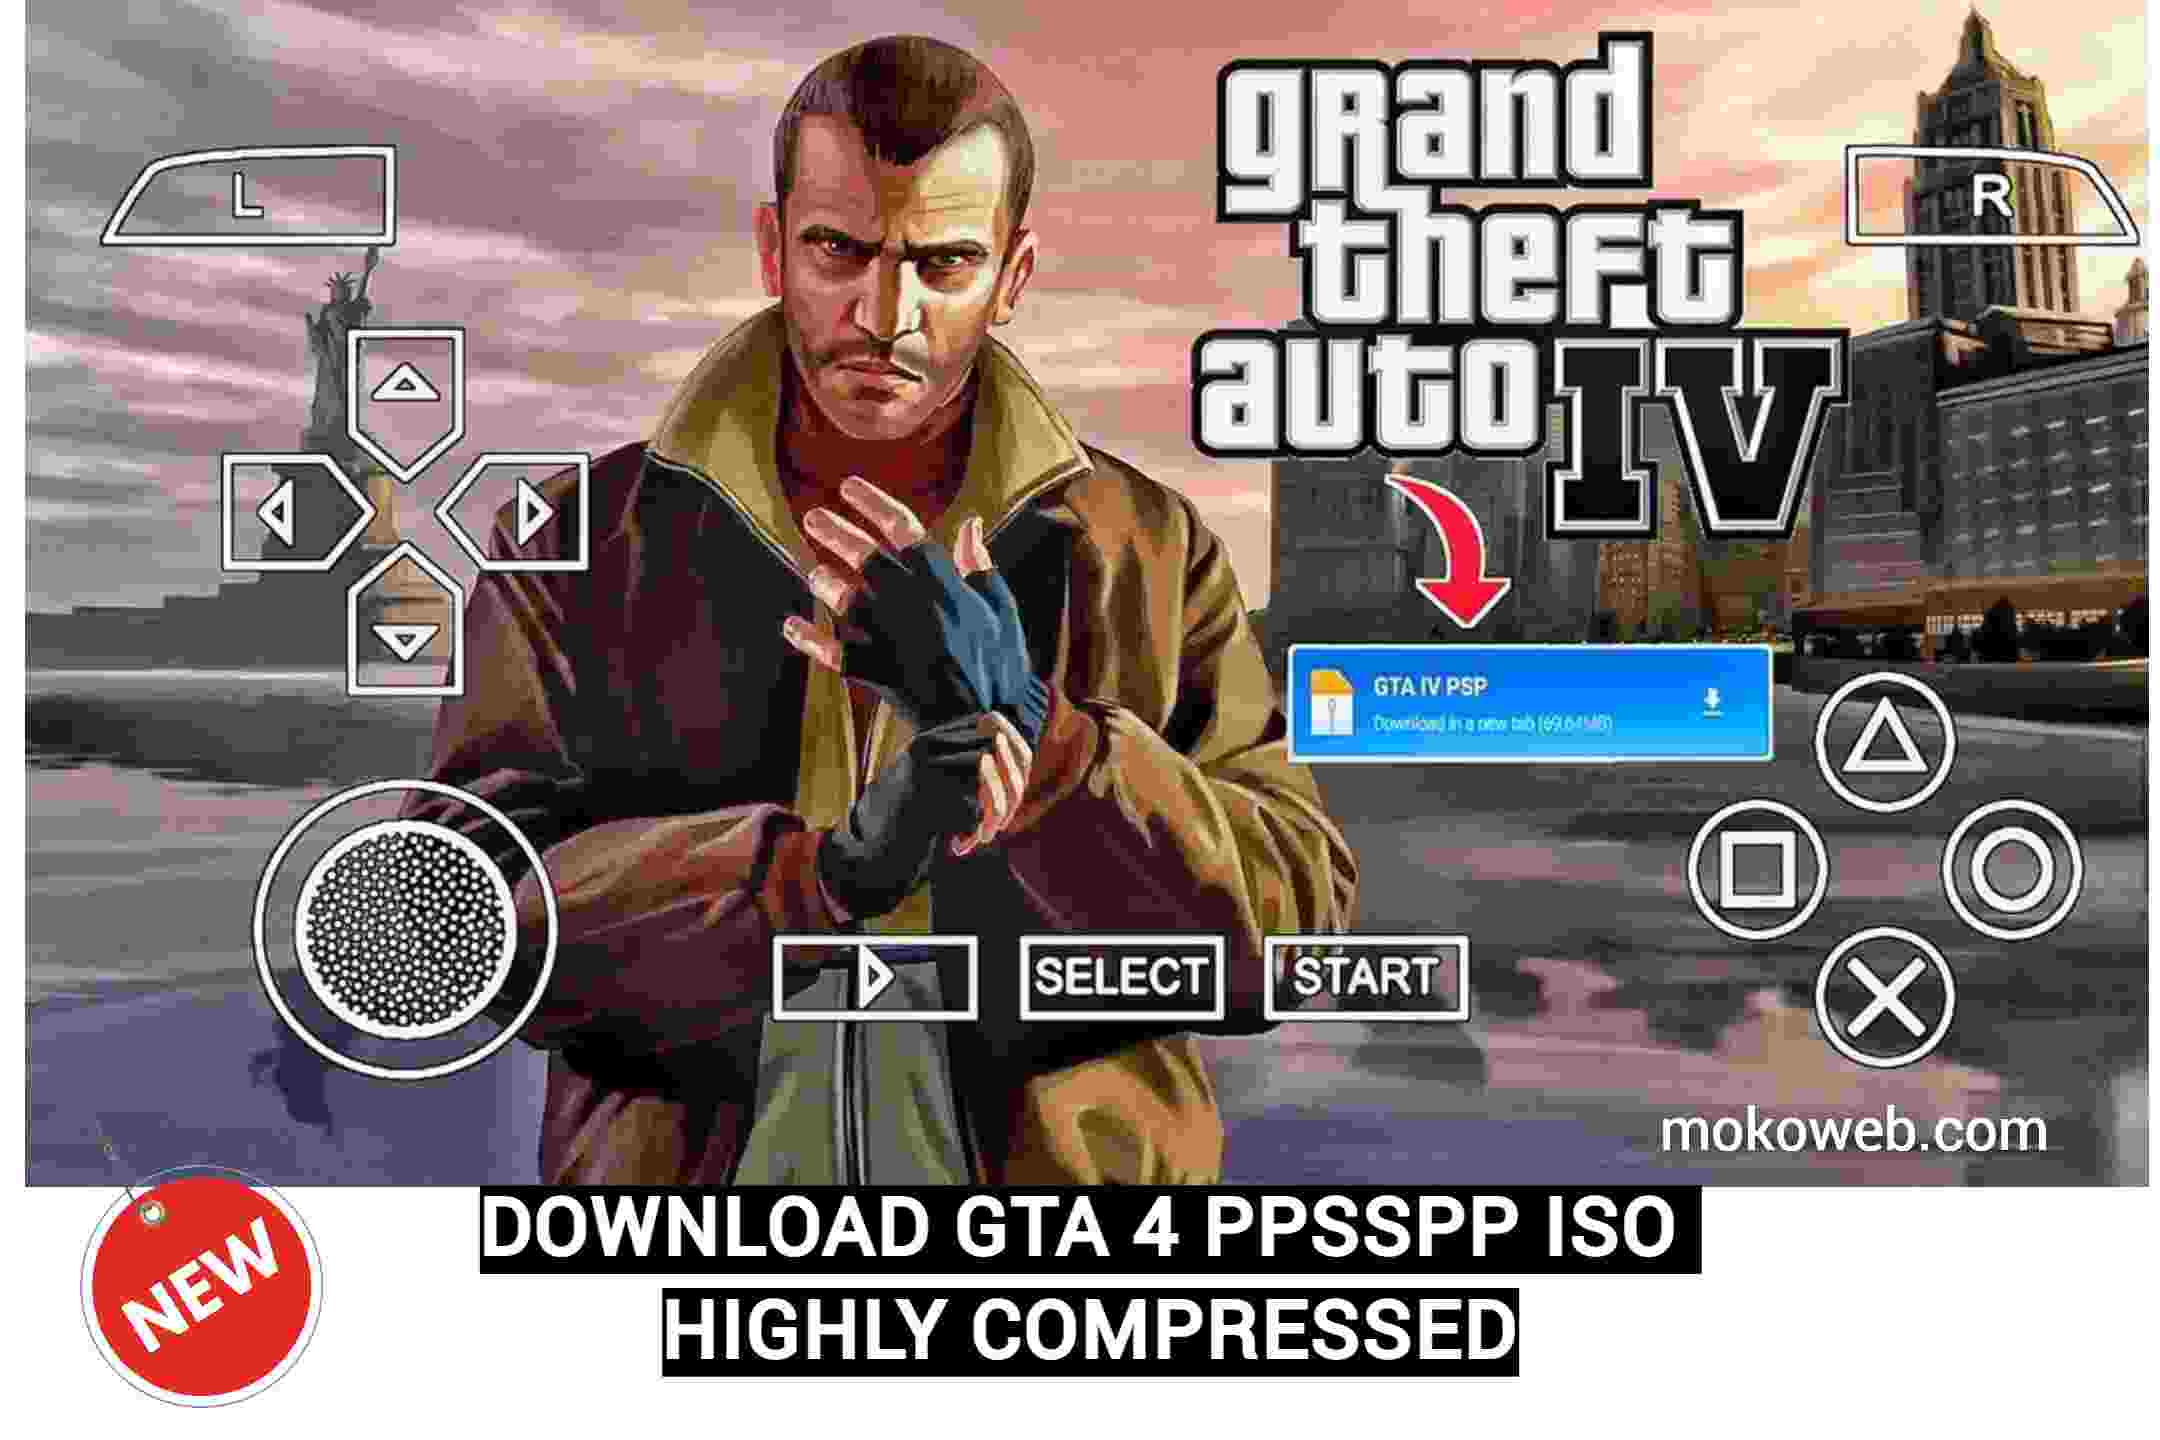 Download do arquivo zip GTA 4 PPSSPP ISO para Android